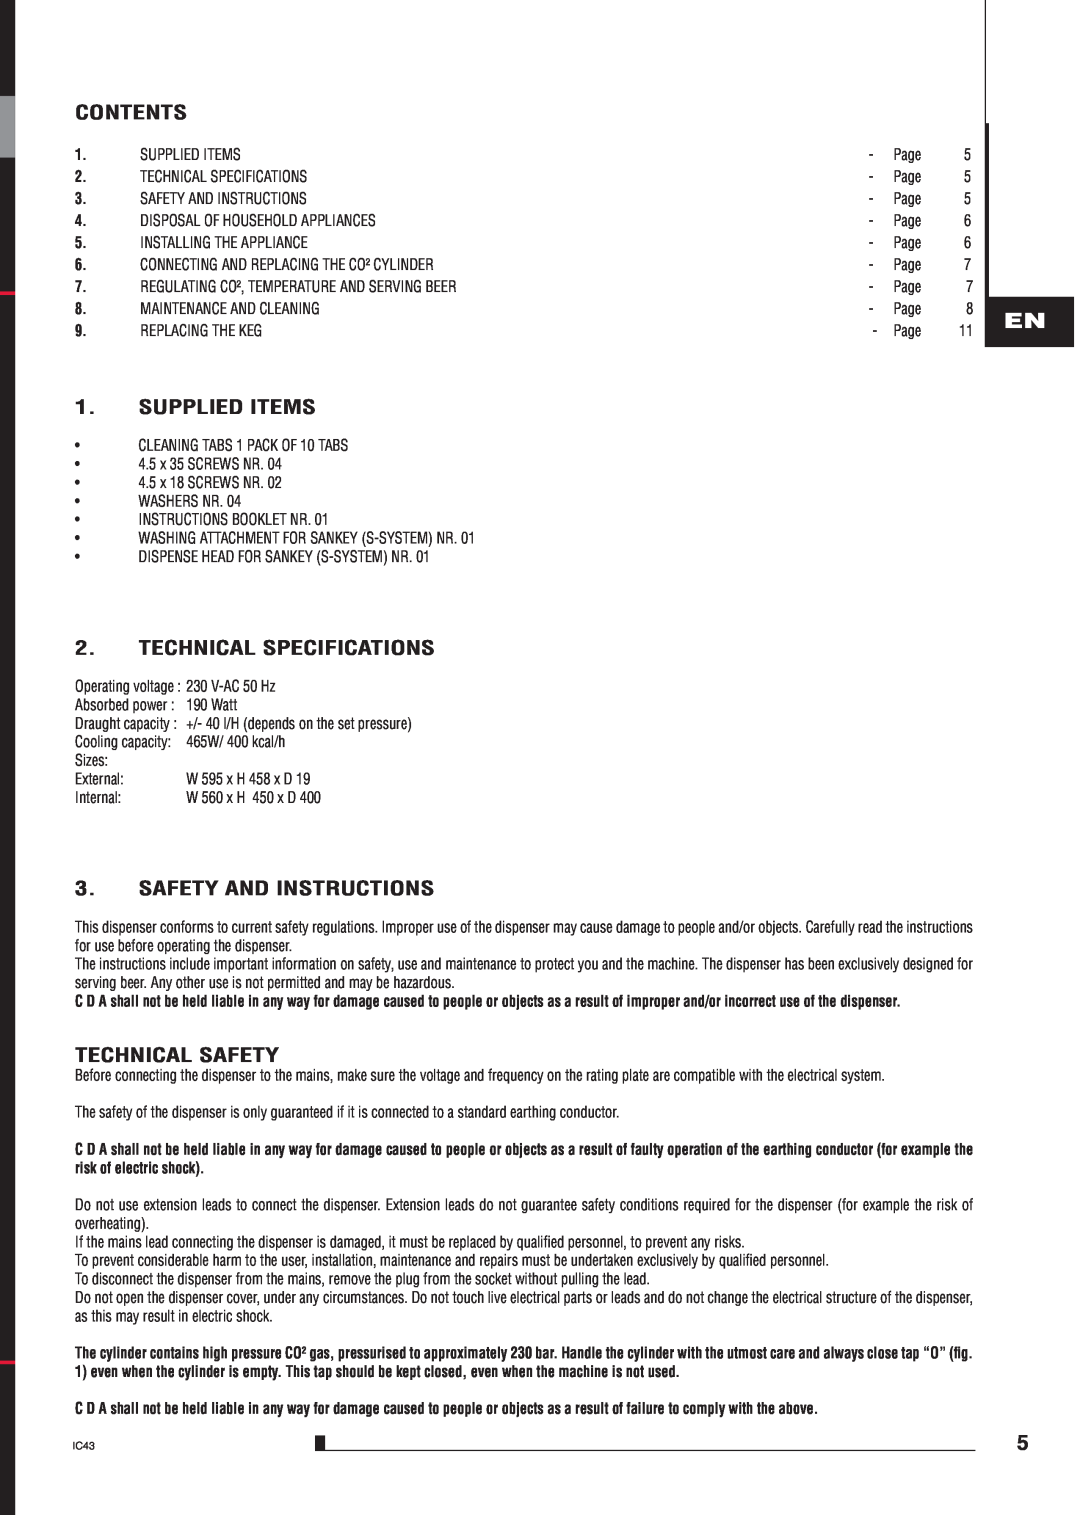 CDA BVB4 manual Contents, Supplied Items, Technical Specifications, Safety And Instructions, Technical Safety 